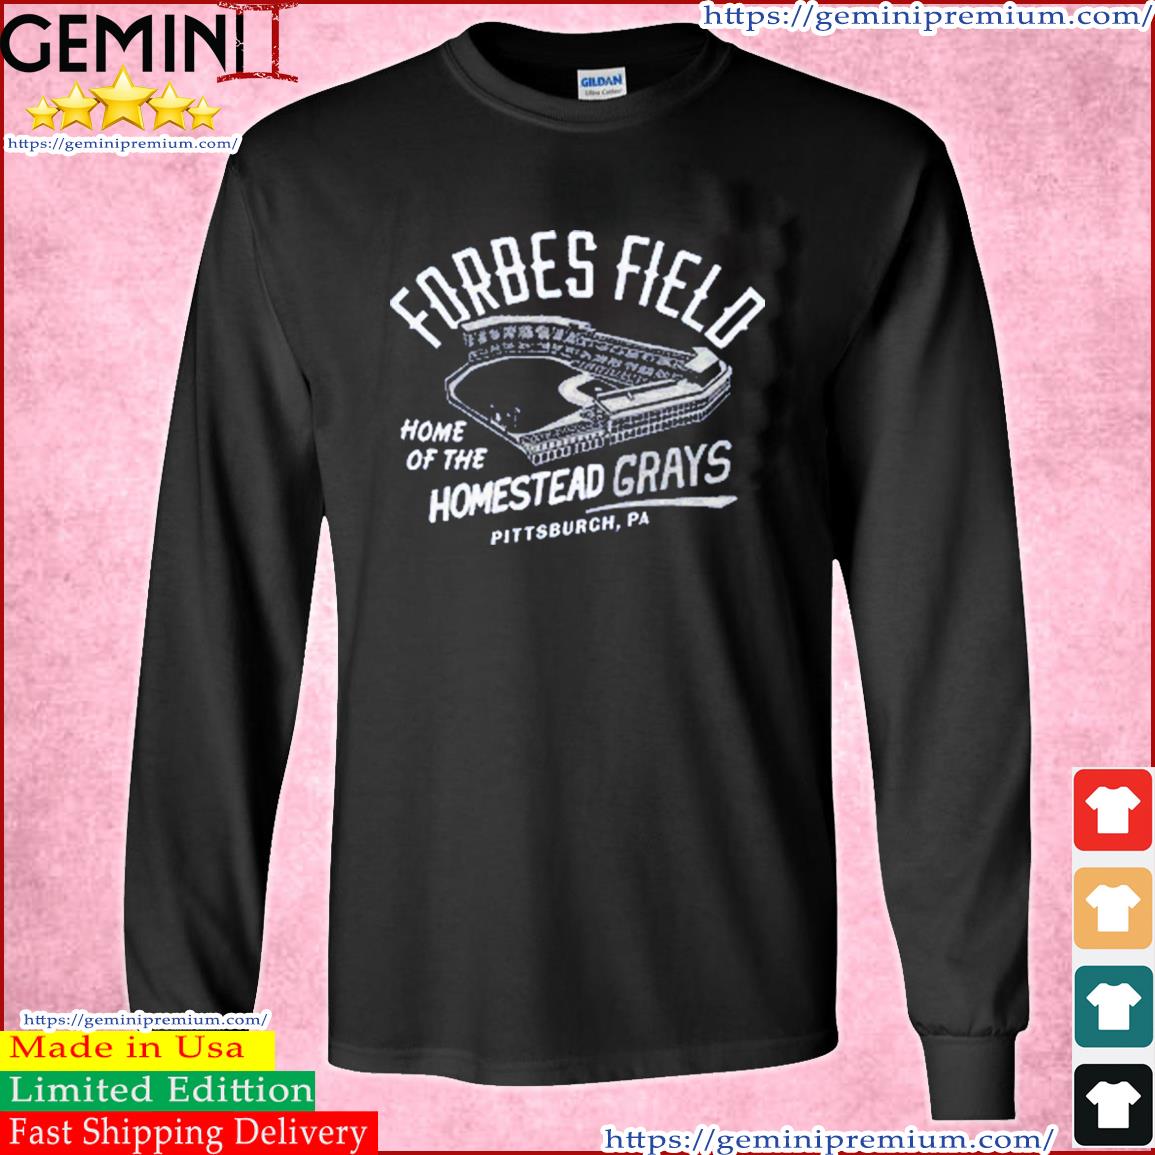 Forbes Field Home Of The Homestead Grays Pittsburgh s Long Sleeve Tee